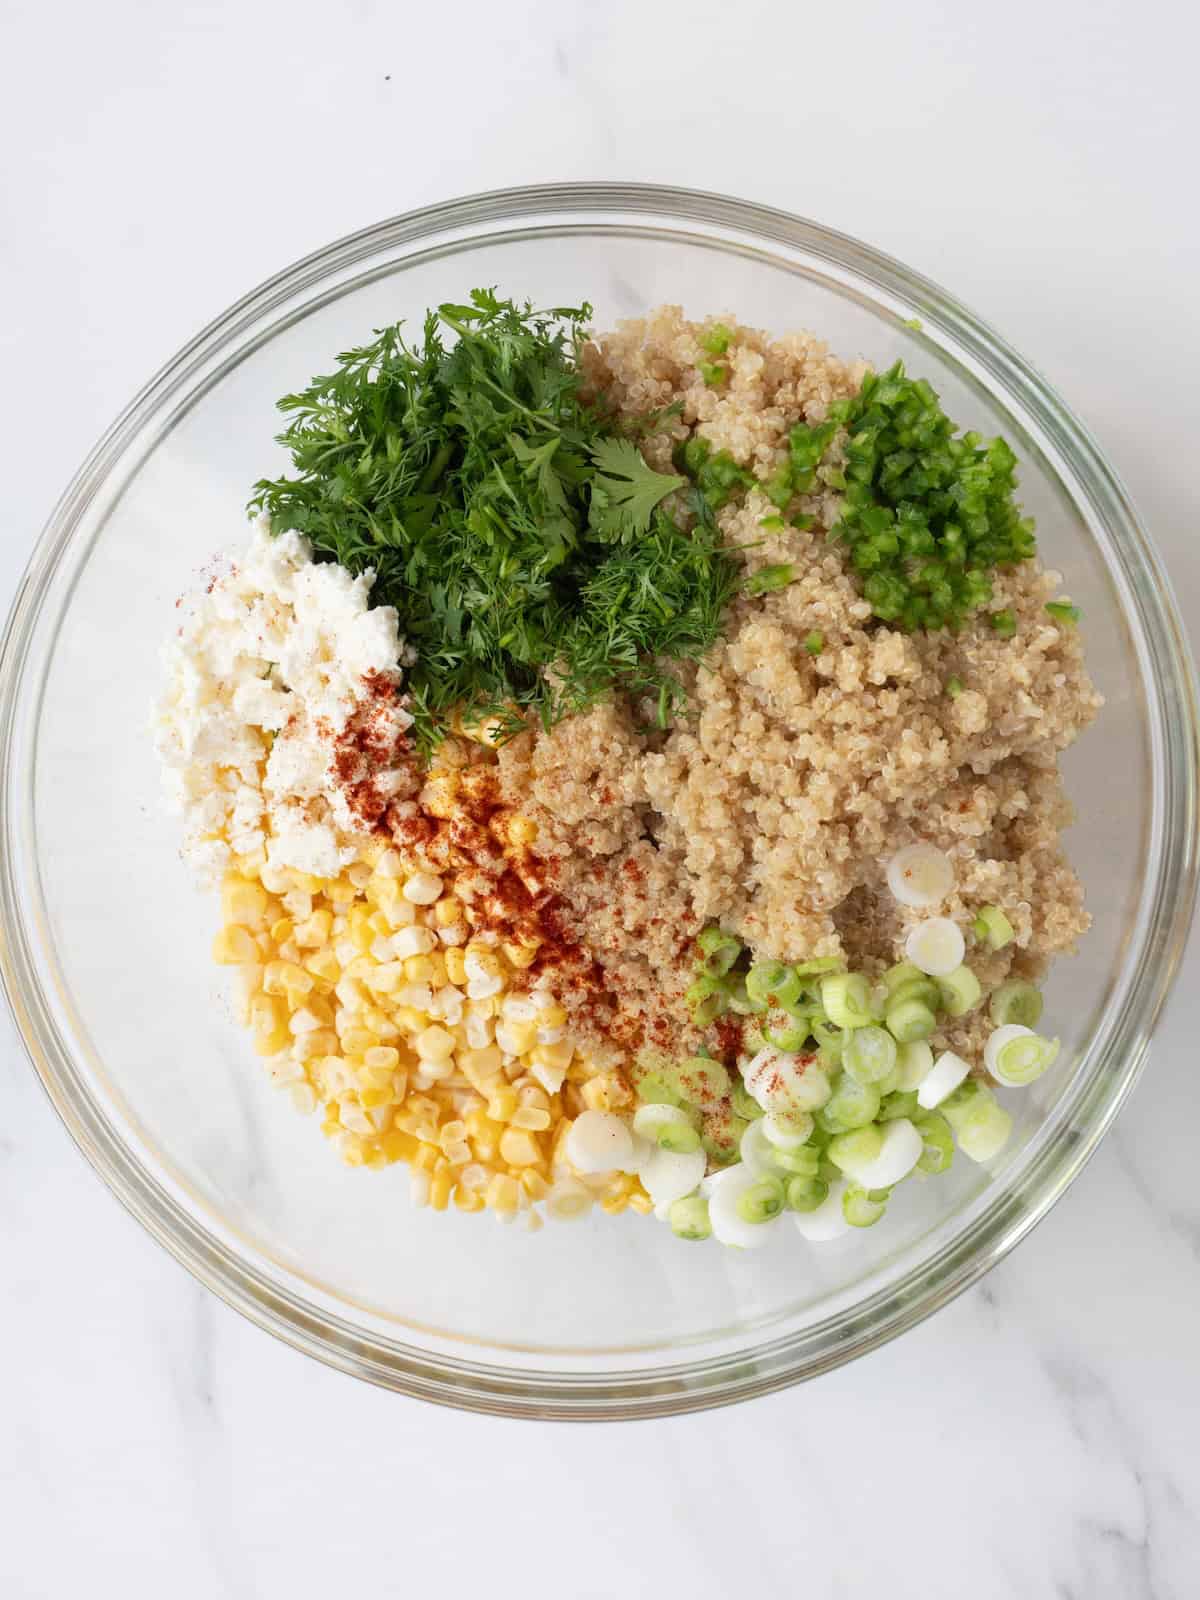 A large glass mixing bowl with corn, green onions, quinoa, cotija cheese, chili powder, cilantro, lime juice and jalapeño to make mexican corn and quinoa salad.